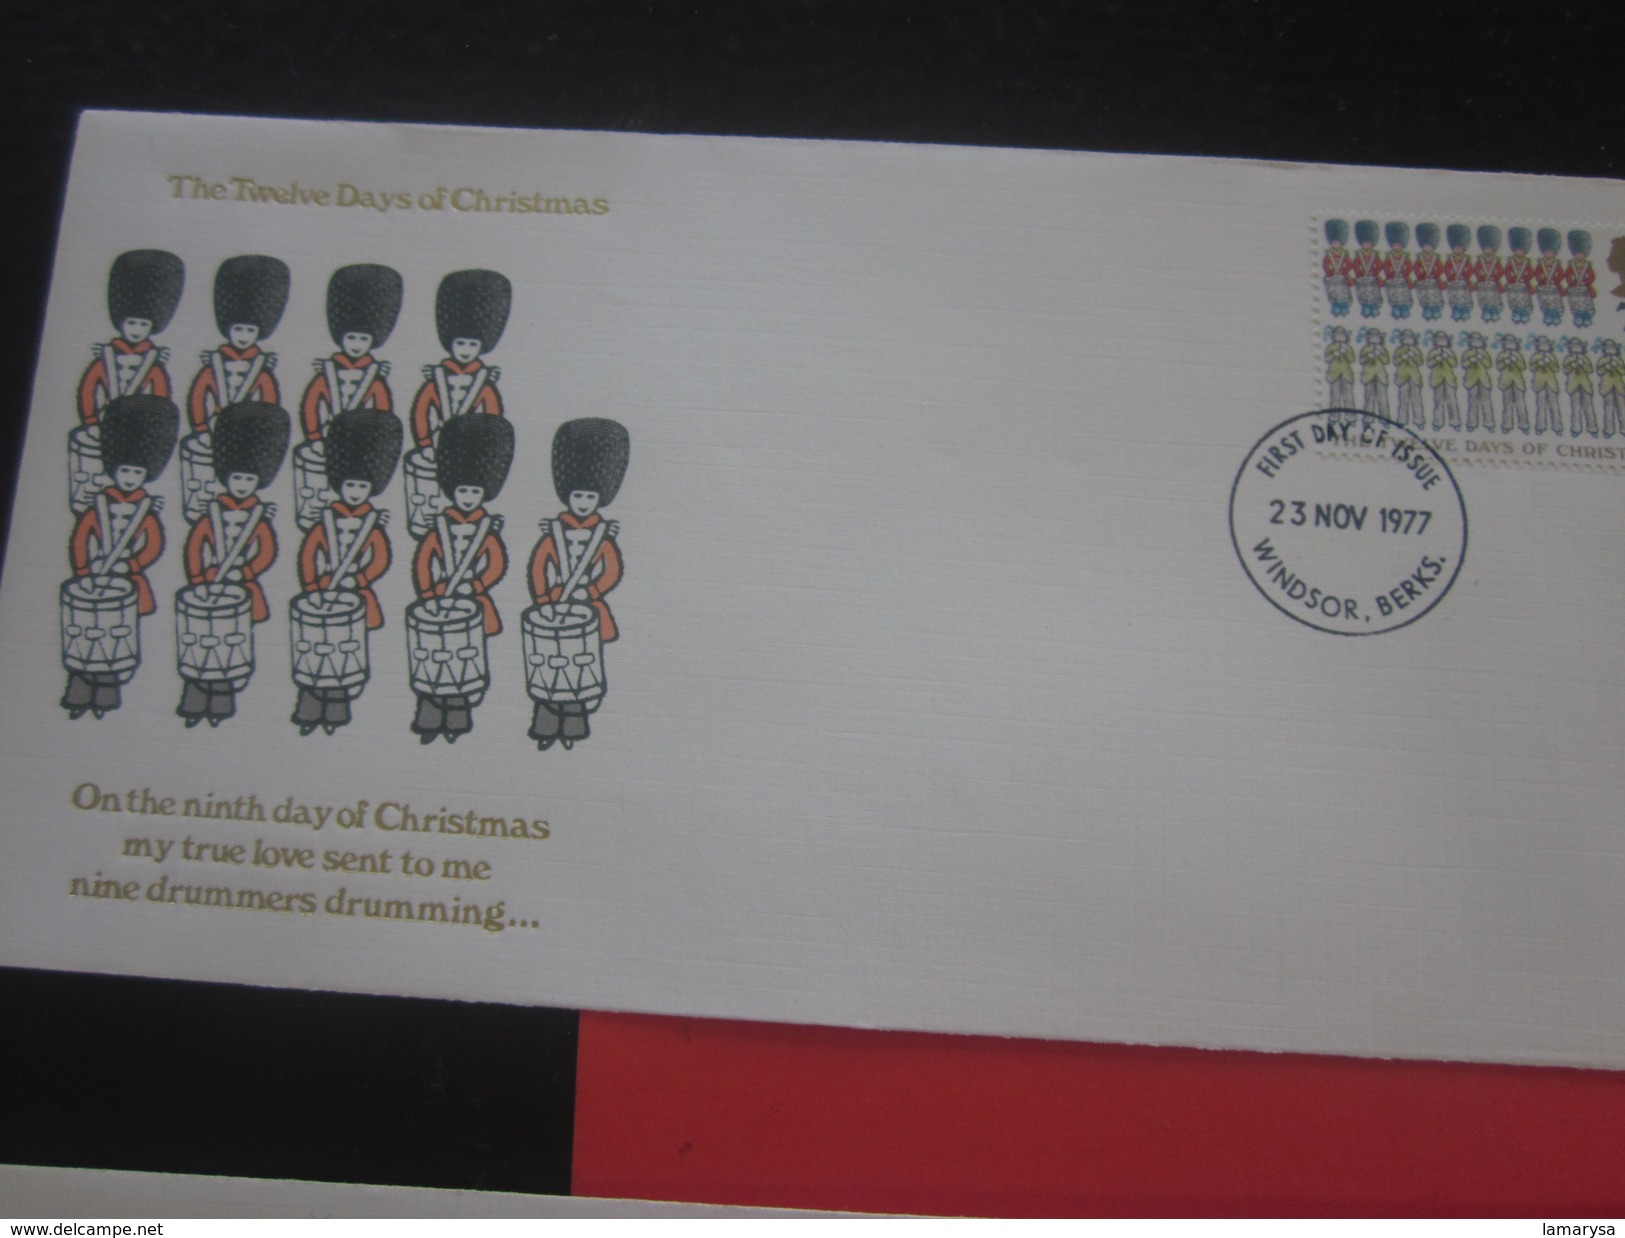 4 FDC First Day Cover Great-Britain Grande-Em.décim The Twelve Days Of Christmas>Marcophilie-Lettre-Air-mail-23 Nov 1977 - 1971-1980 Decimal Issues